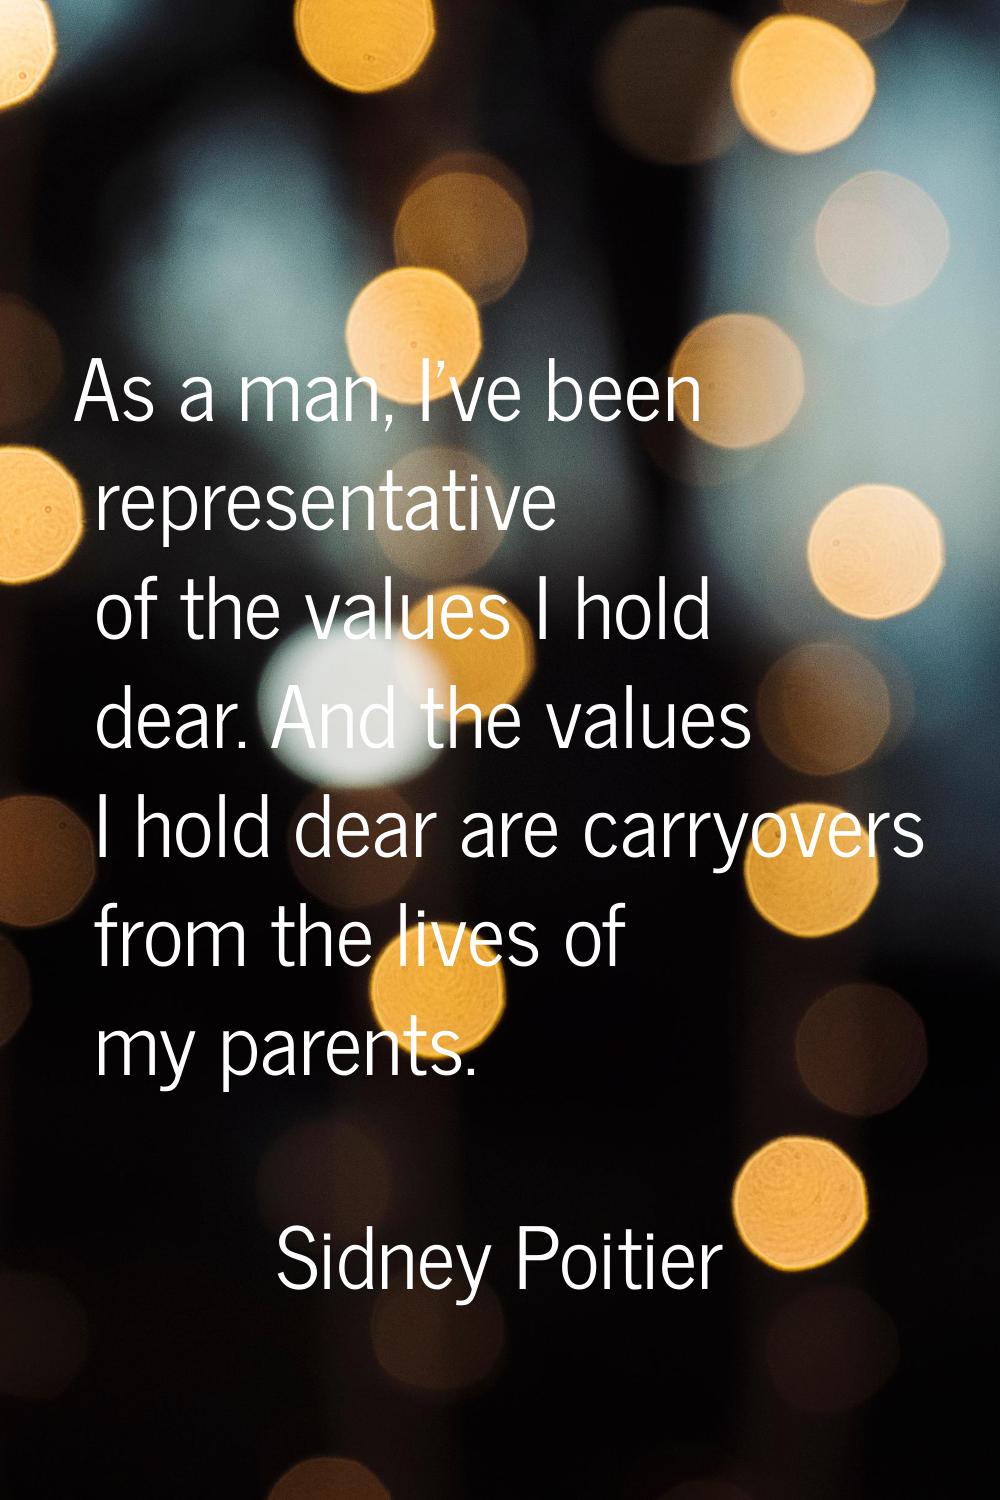 As a man, I've been representative of the values I hold dear. And the values I hold dear are carryo